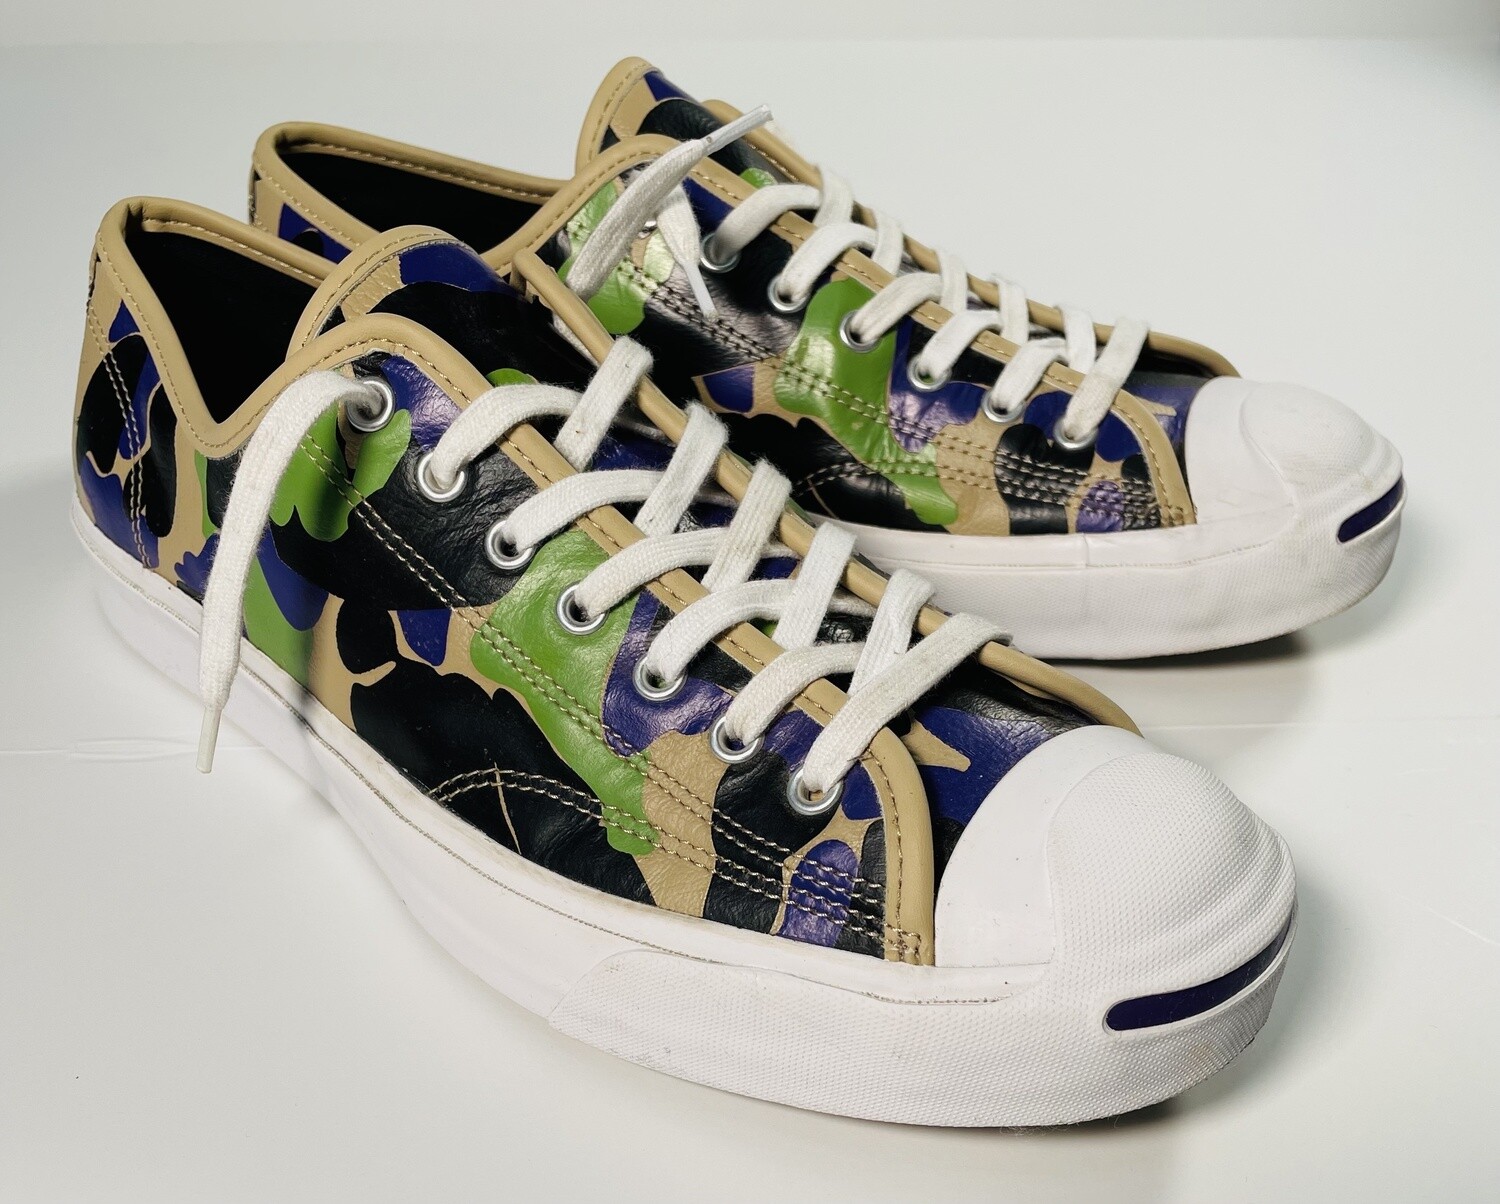 CONVERSE Jack Purcell OX candied ginger camo Sneaker